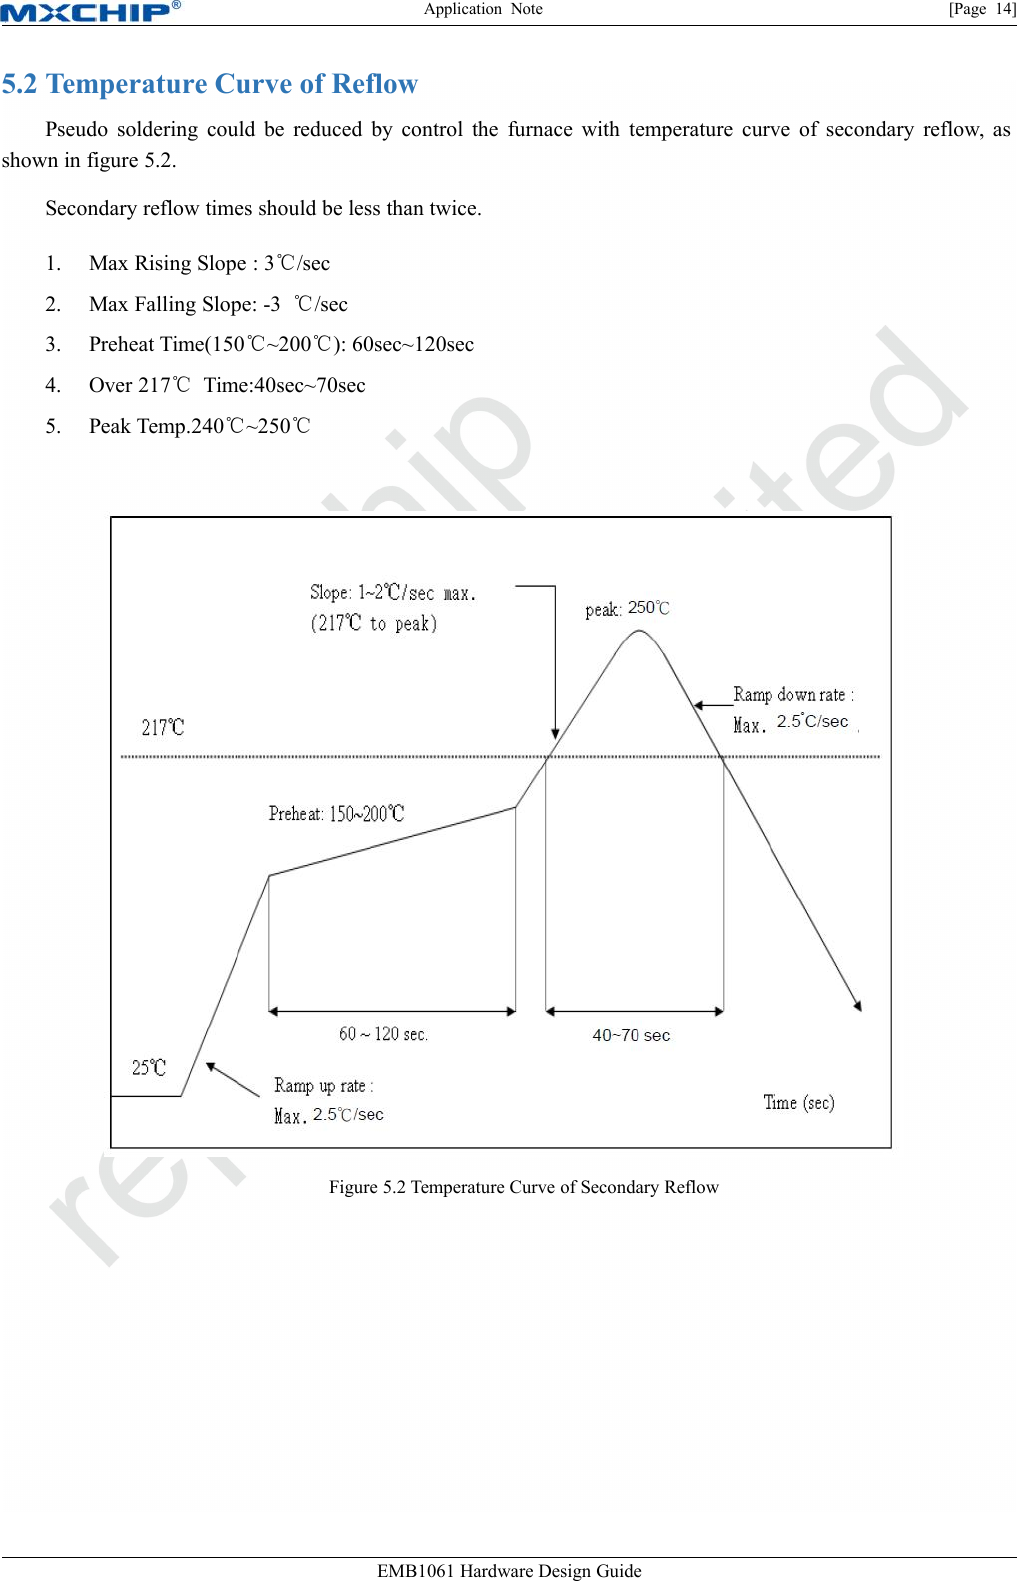 Application Note [Page 14]EMB1061 Hardware Design Guide5.2 Temperature Curve of ReflowPseudo soldering could be reduced by control the furnace with temperature curve of secondary reflow, asshown in figure 5.2.Secondary reflow times should be less than twice.1. Max Rising Slope : 3℃/sec2. Max Falling Slope: -3 ℃/sec3. Preheat Time(150℃~200℃): 60sec~120sec4. Over 217℃Time:40sec~70sec5. Peak Temp.240℃~250℃Figure 5.2 Temperature Curve of Secondary Reflow